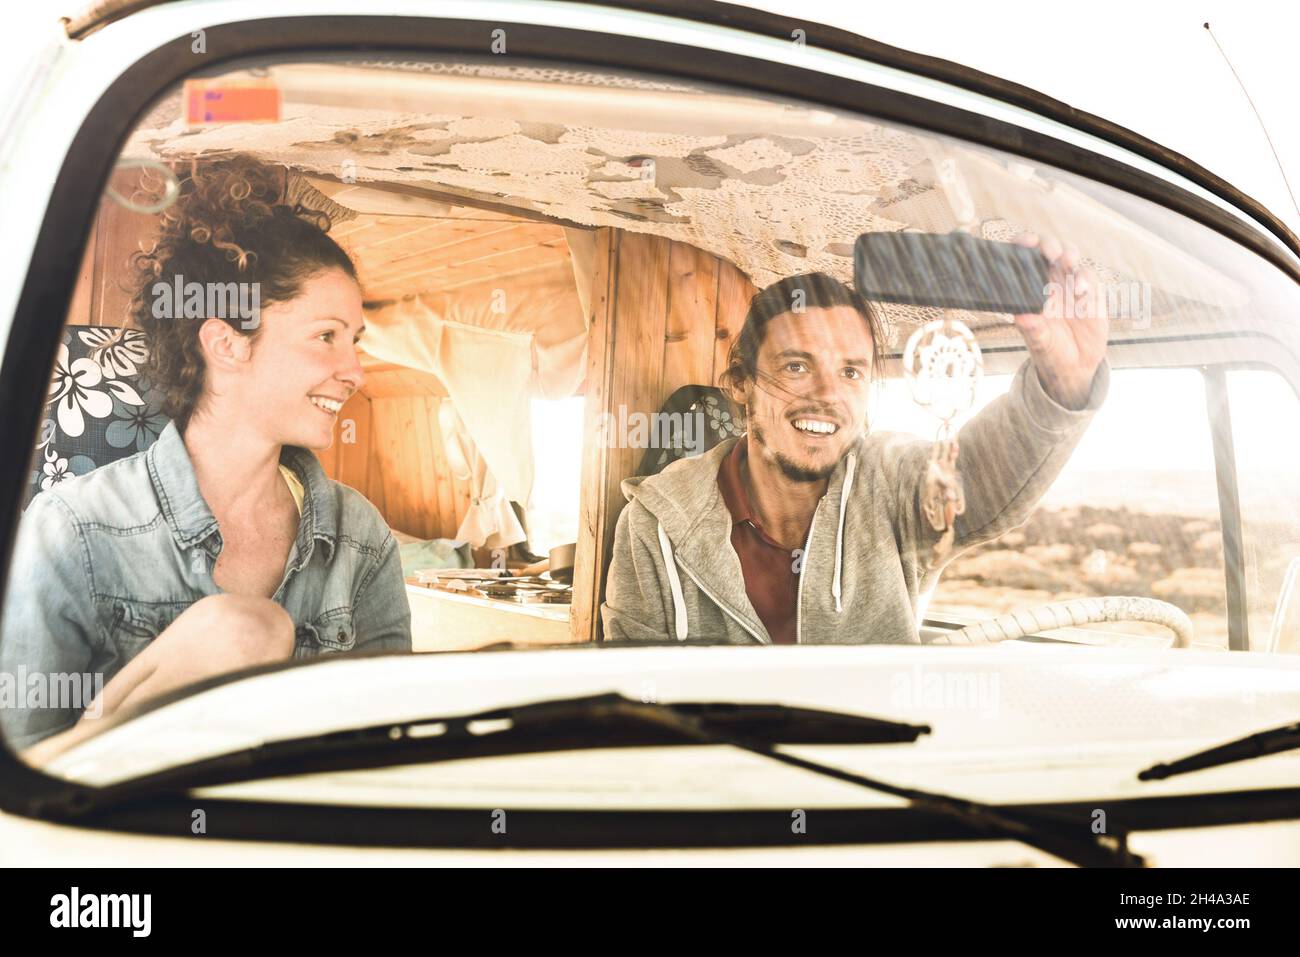 Indie couple ready for roadtrip on oldtimer mini van transport - Travel lifestyle concept with young hippie people having fun traveling on minivan Stock Photo